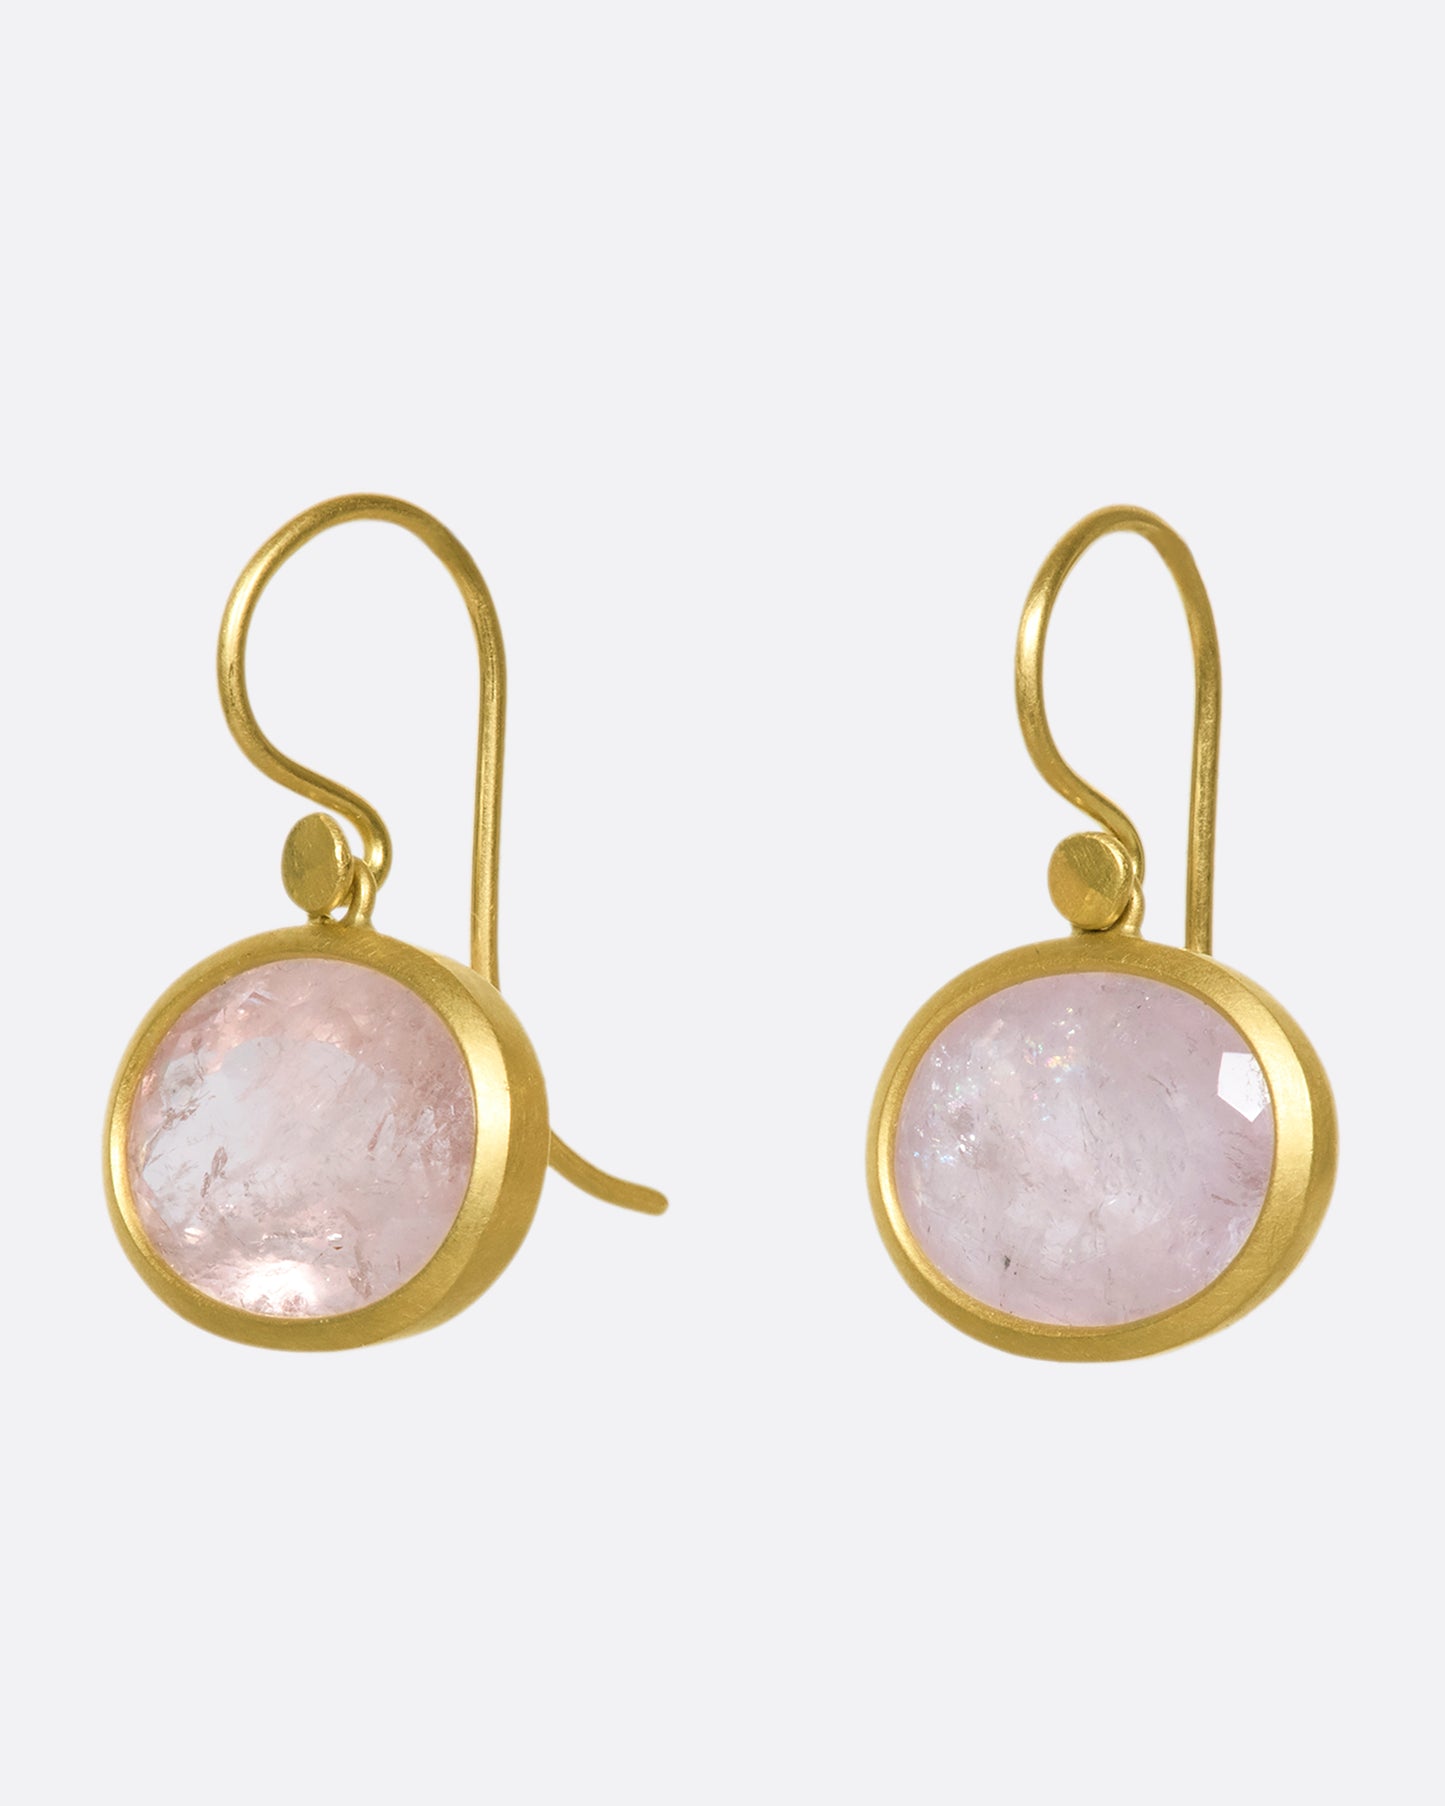 A side view of a pair of oval morganite drop earrings with yellow gold bezels and hooks.